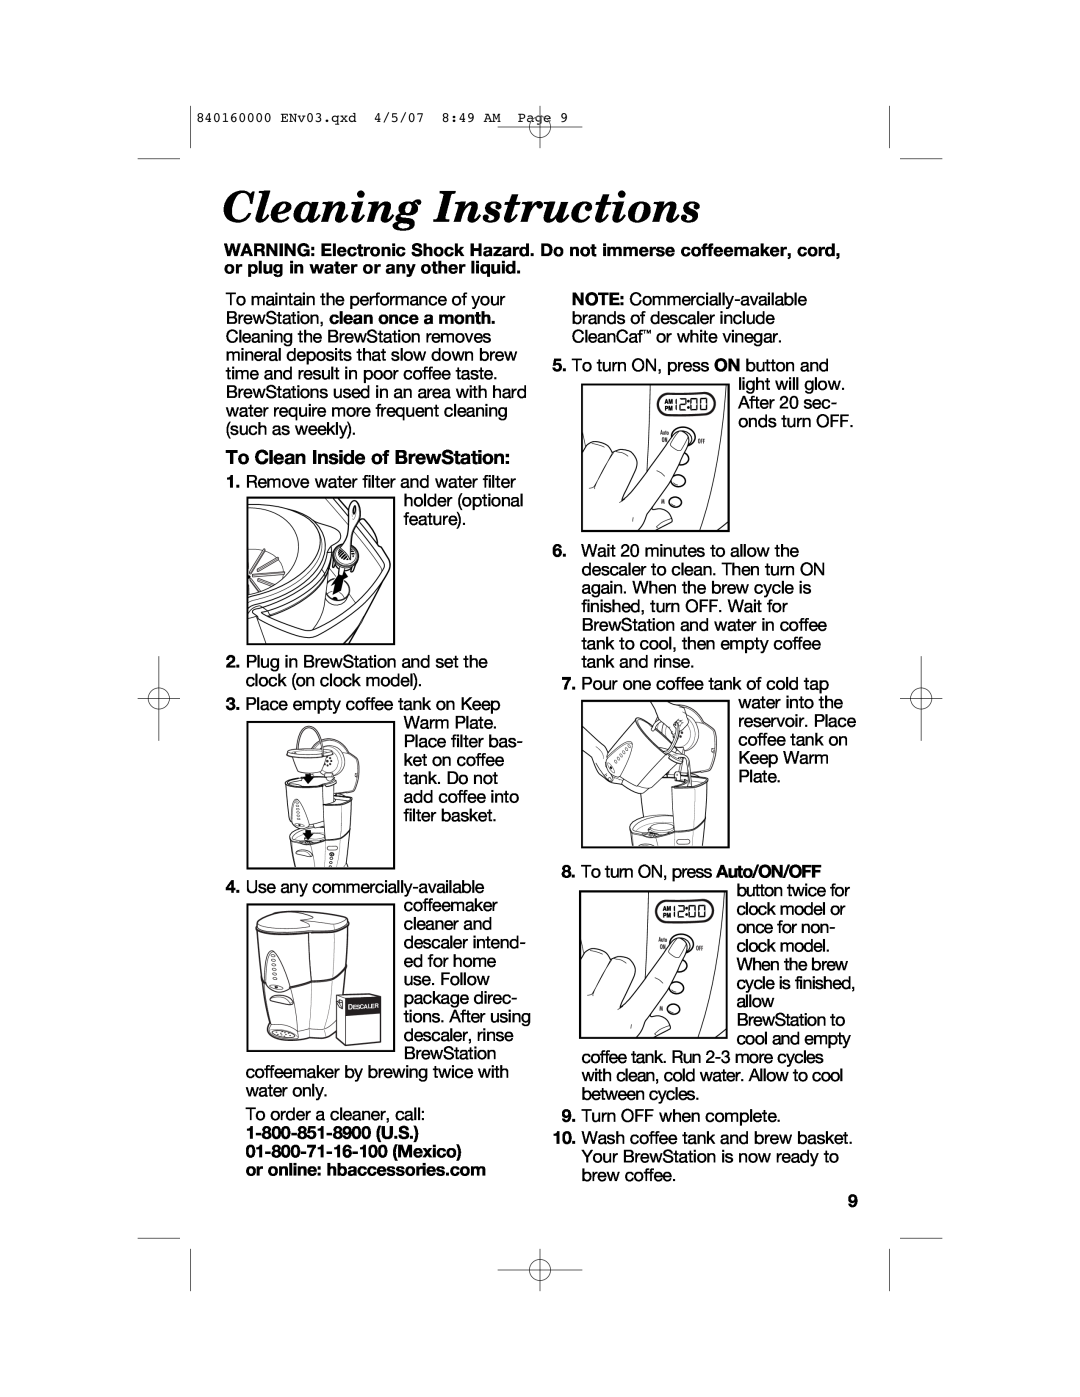 Hamilton Beach D43012B manual Cleaning Instructions, To Clean Inside of BrewStation, Mexico or online hbaccessories.com 